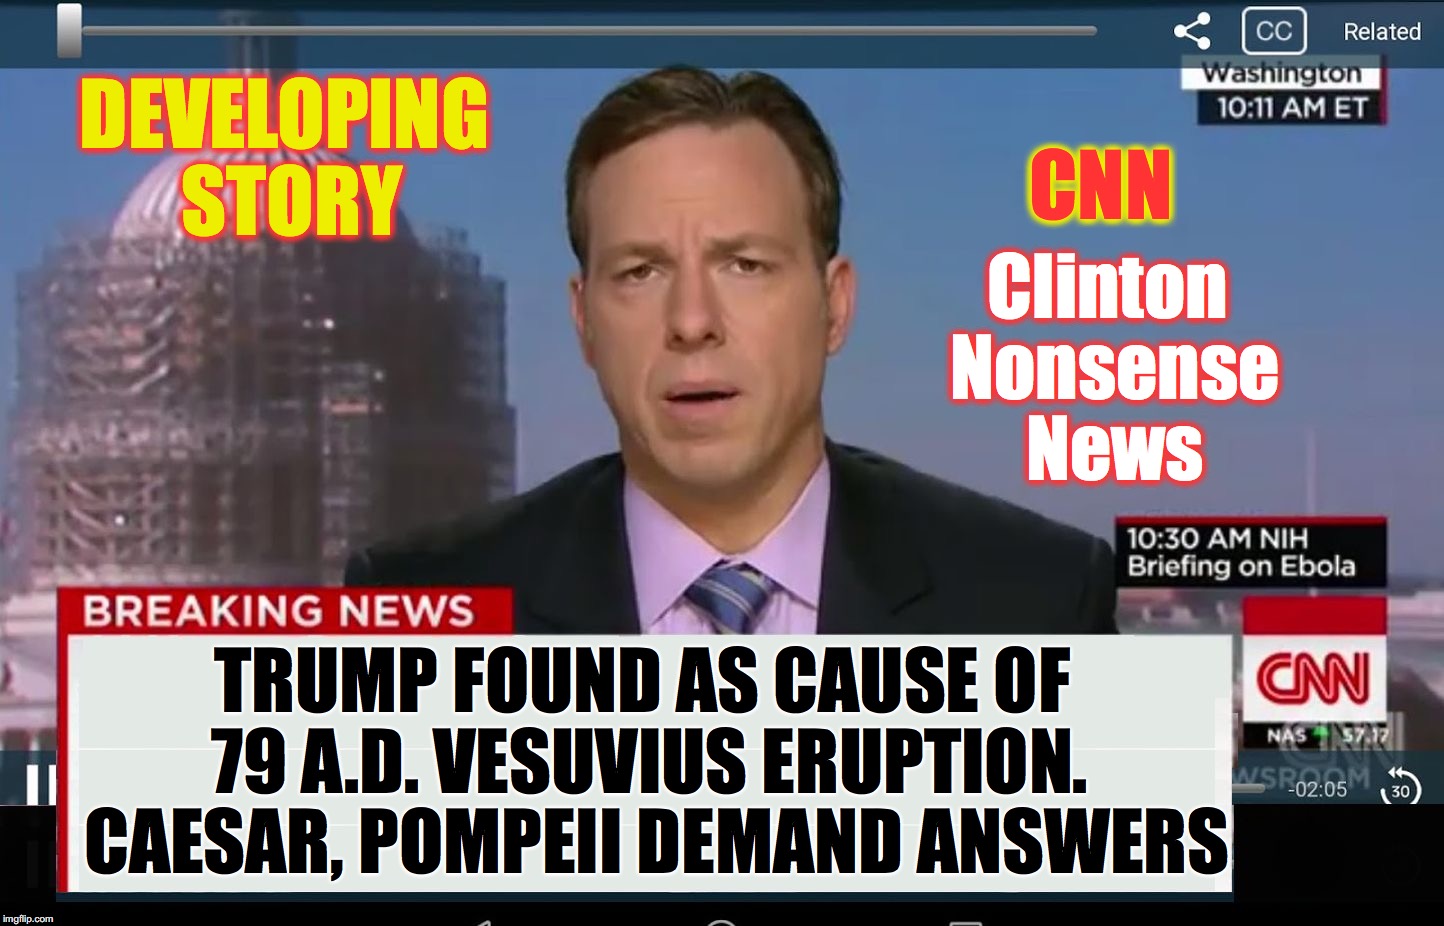 CNN Crazy News Network | CNN; DEVELOPING STORY; Clinton Nonsense News; TRUMP FOUND AS CAUSE OF 79 A.D. VESUVIUS ERUPTION.  CAESAR, POMPEII DEMAND ANSWERS | image tagged in cnn crazy news network | made w/ Imgflip meme maker